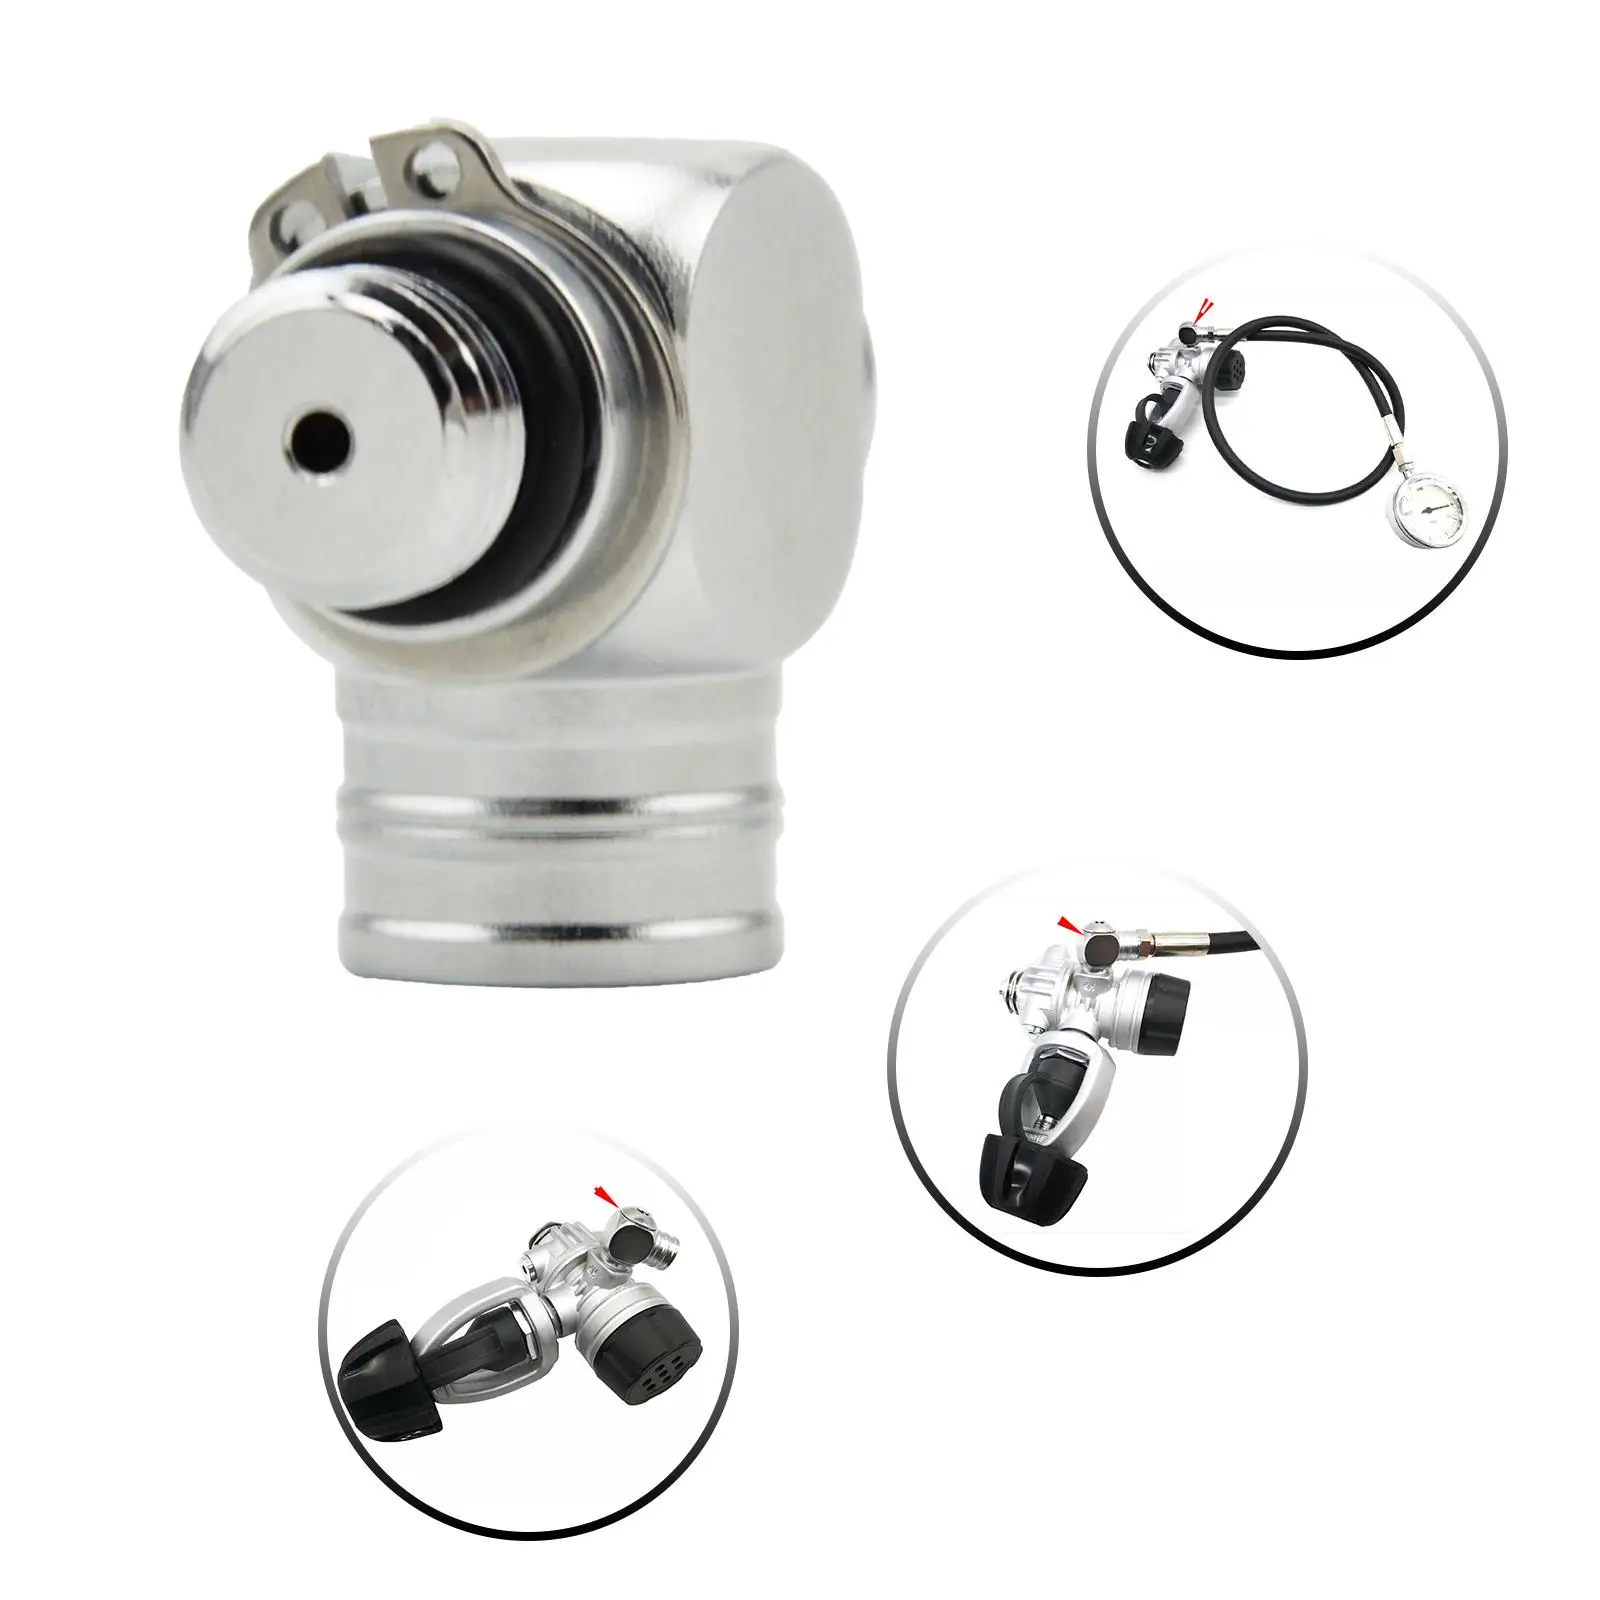 Scuba Diving Dive Regulator Adapter Dive First Stage Adapter Attachments